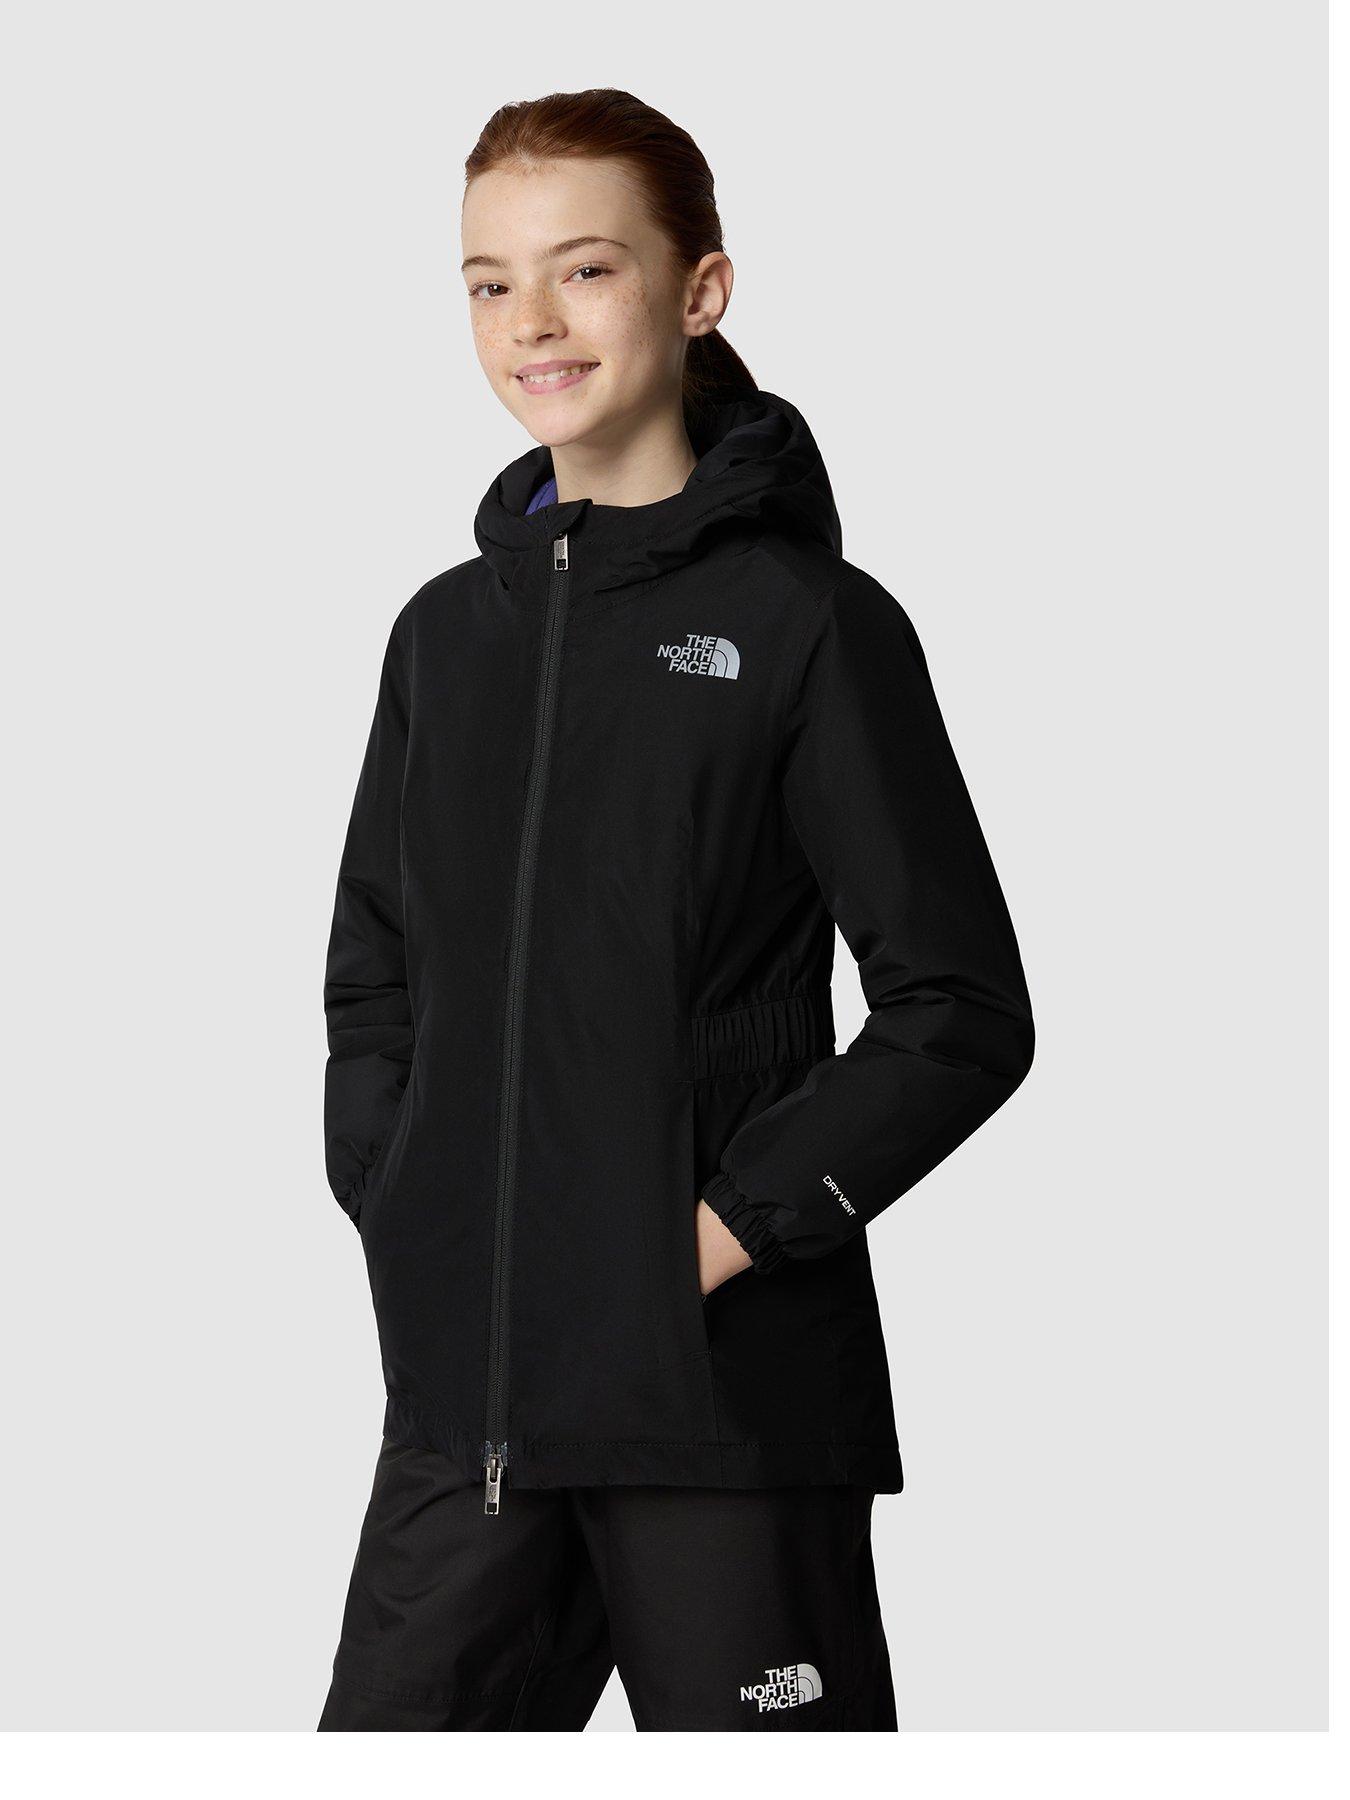 THE NORTH FACE Girls Hikesteller Insulated Parka - Black, Black, Size Xs, Women